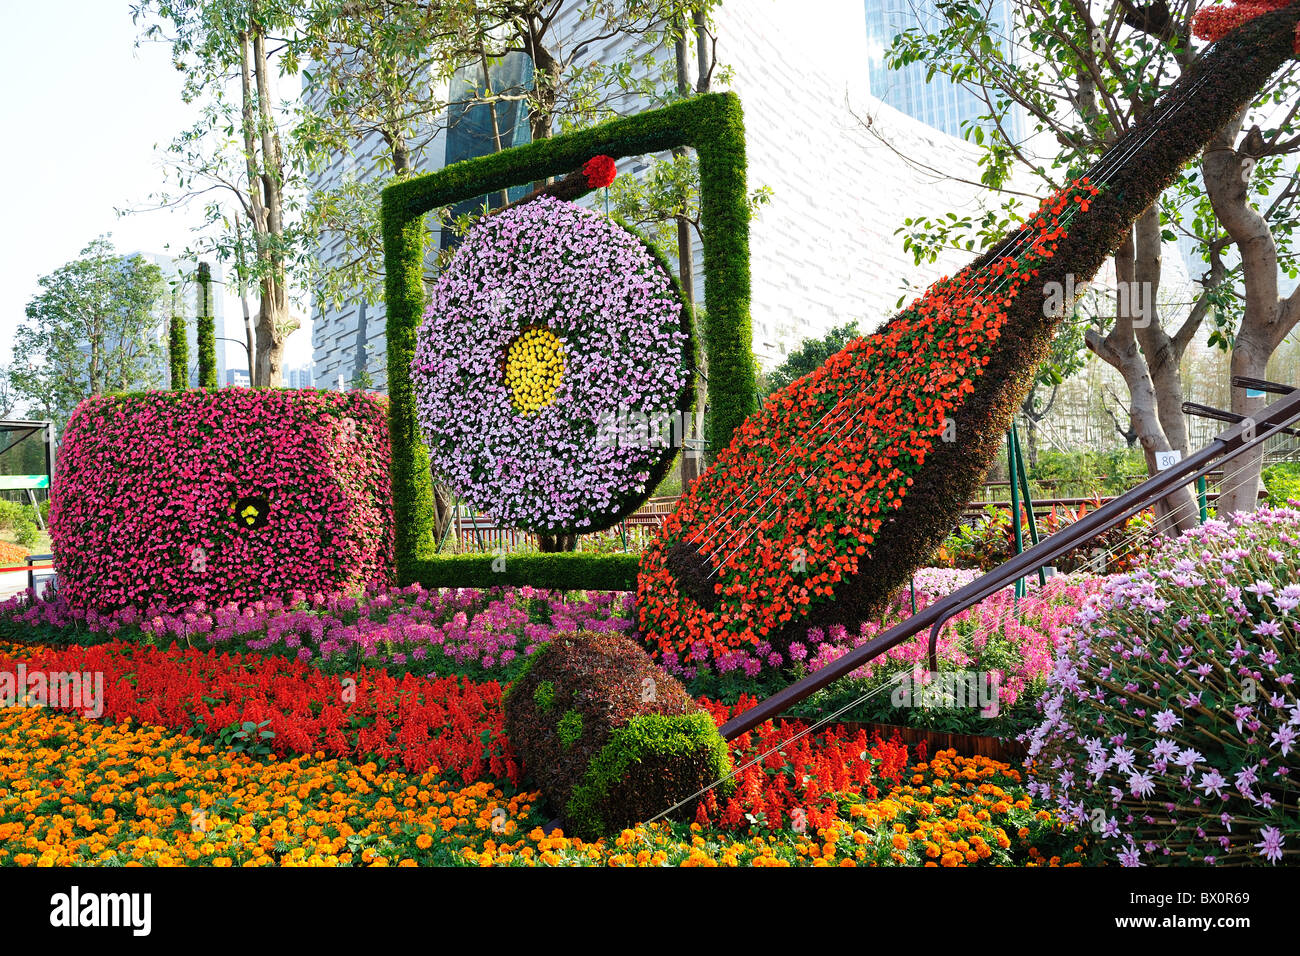 Chinese traditional musical instruments made of flowers in Flower Citizen Plaza, Guangzhou city, China Stock Photo